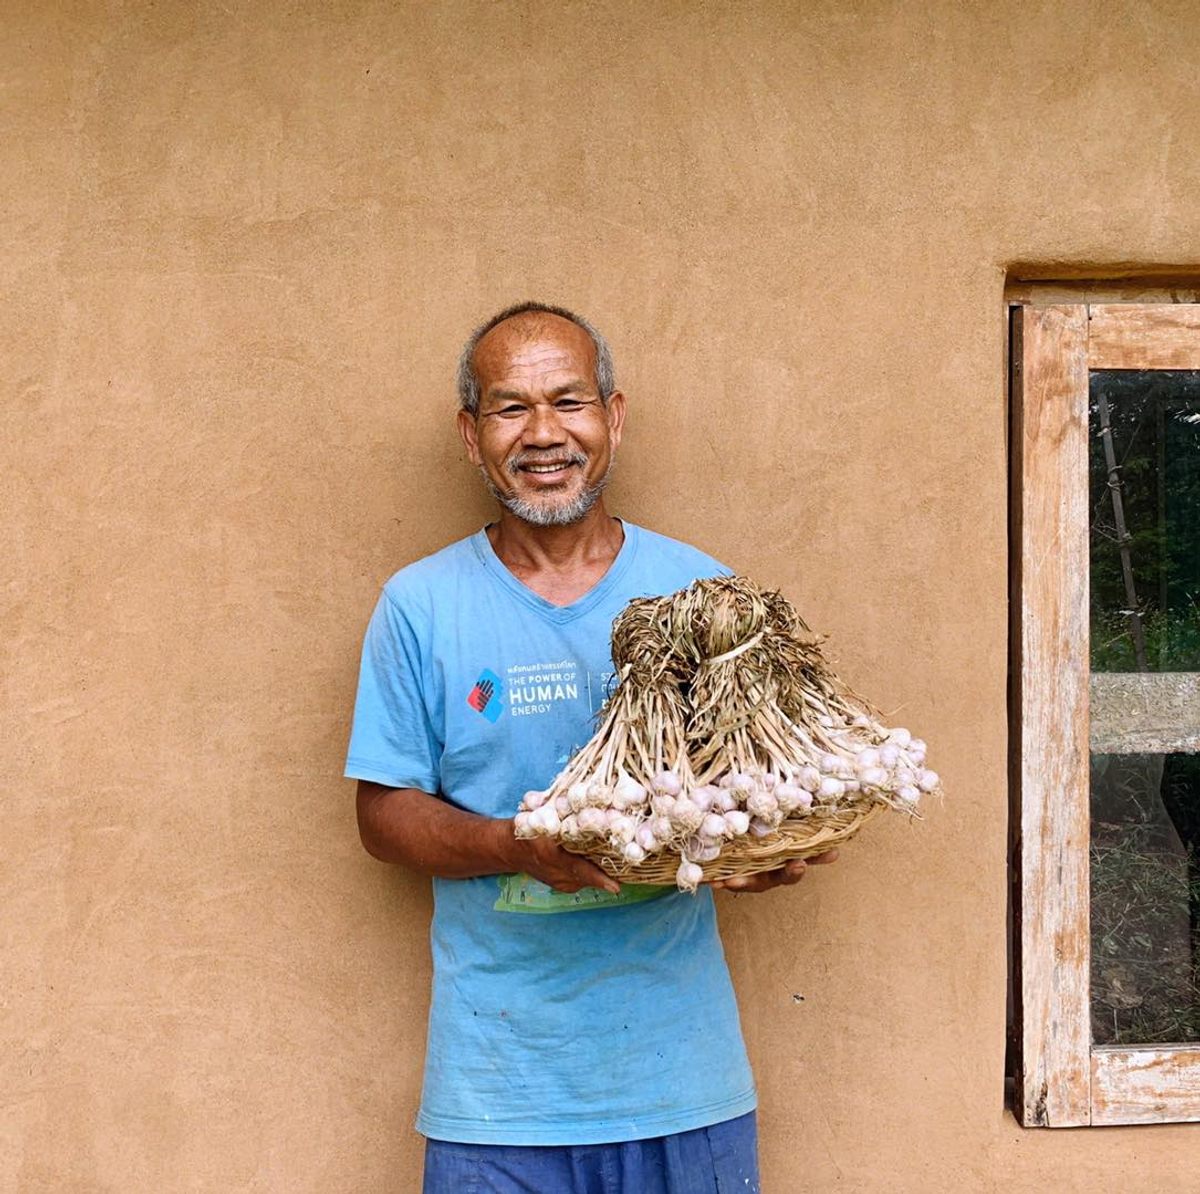 Jon Jandai cultivates and saves the seeds of rare and indigenous plants at the Pun Pun Center for Self Reliance.